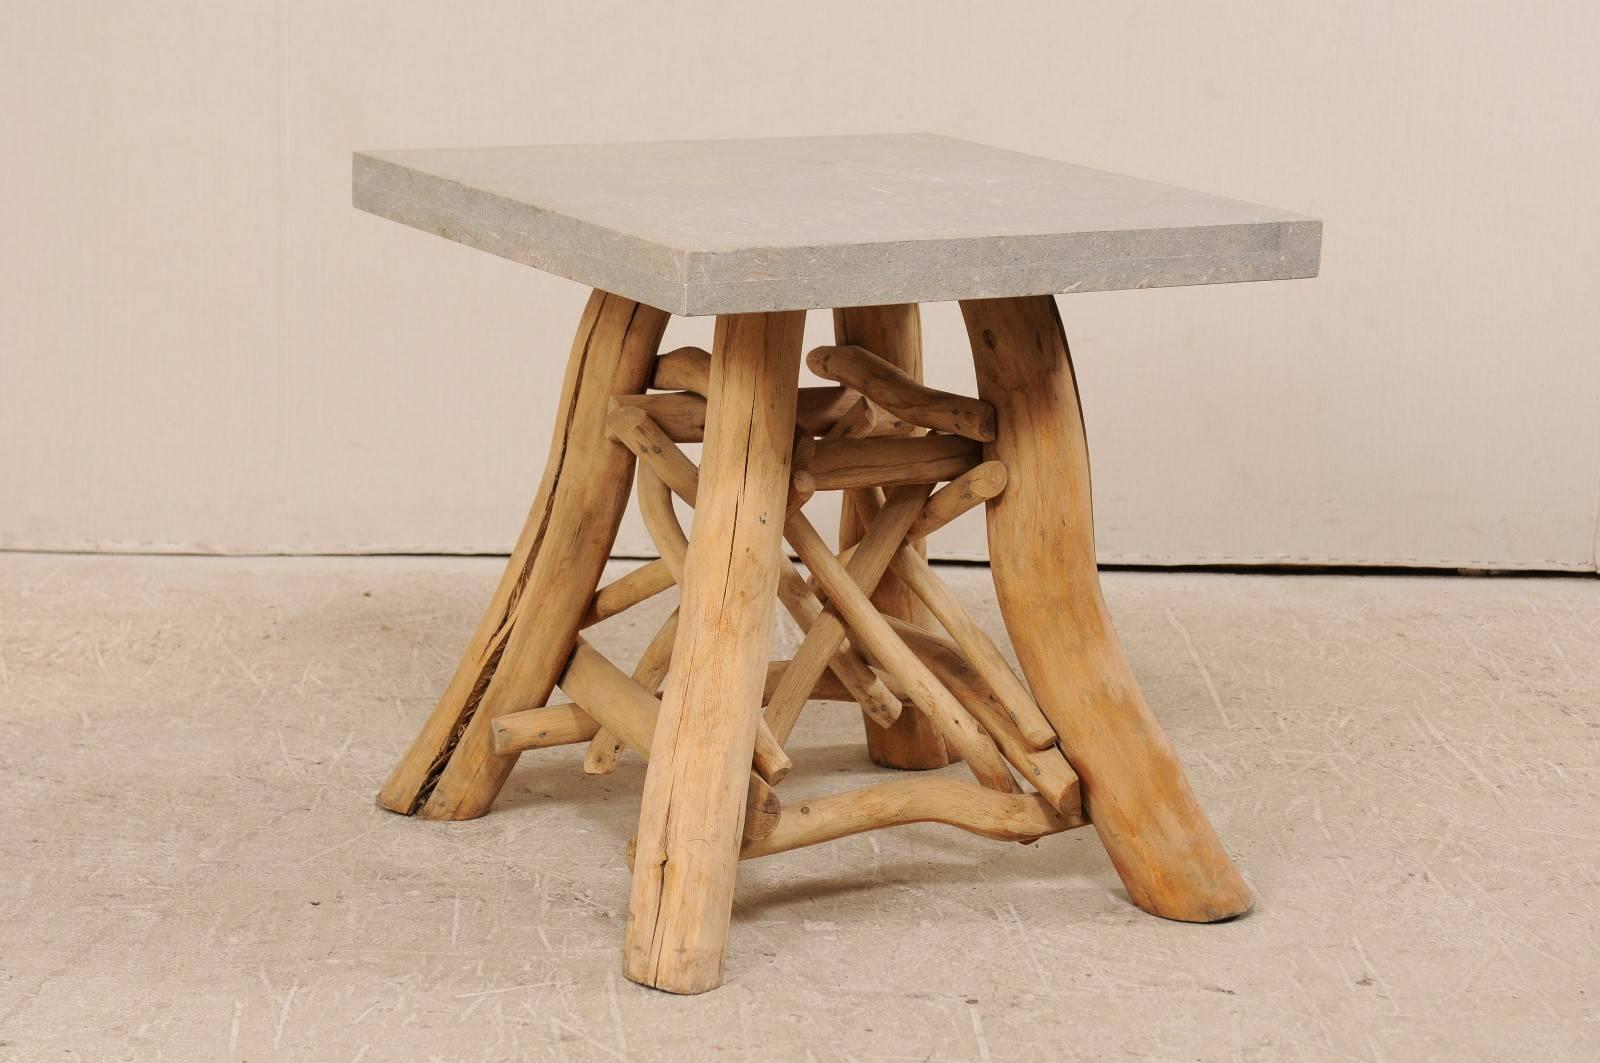 A vintage European occasional table. This wonderfully informal European occasional table features a thickly cut honed and fossilized stone top, square in shape, which is supported by four smoothed, natural wood limbs. The four larger limb feet have